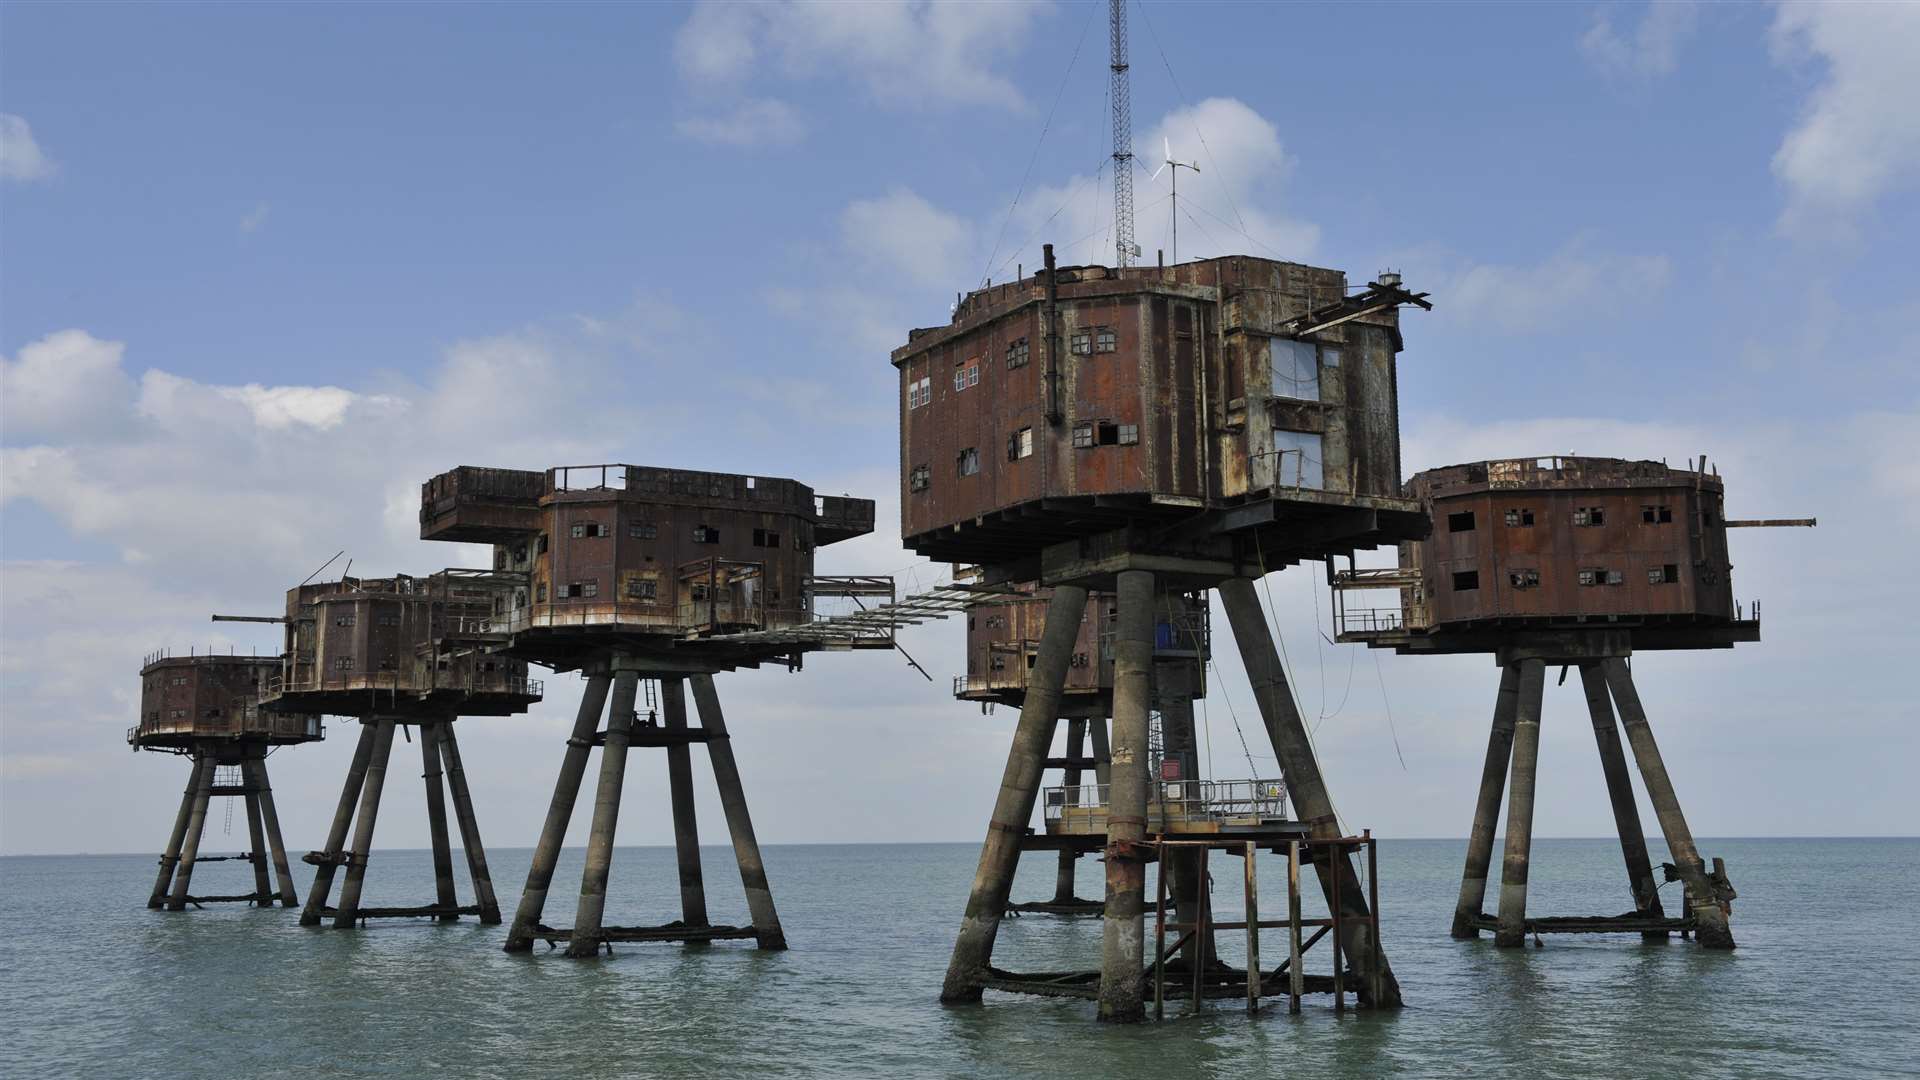 The sea fort, off the coast of Herne Bay and Whitstable, was originally built in 1943